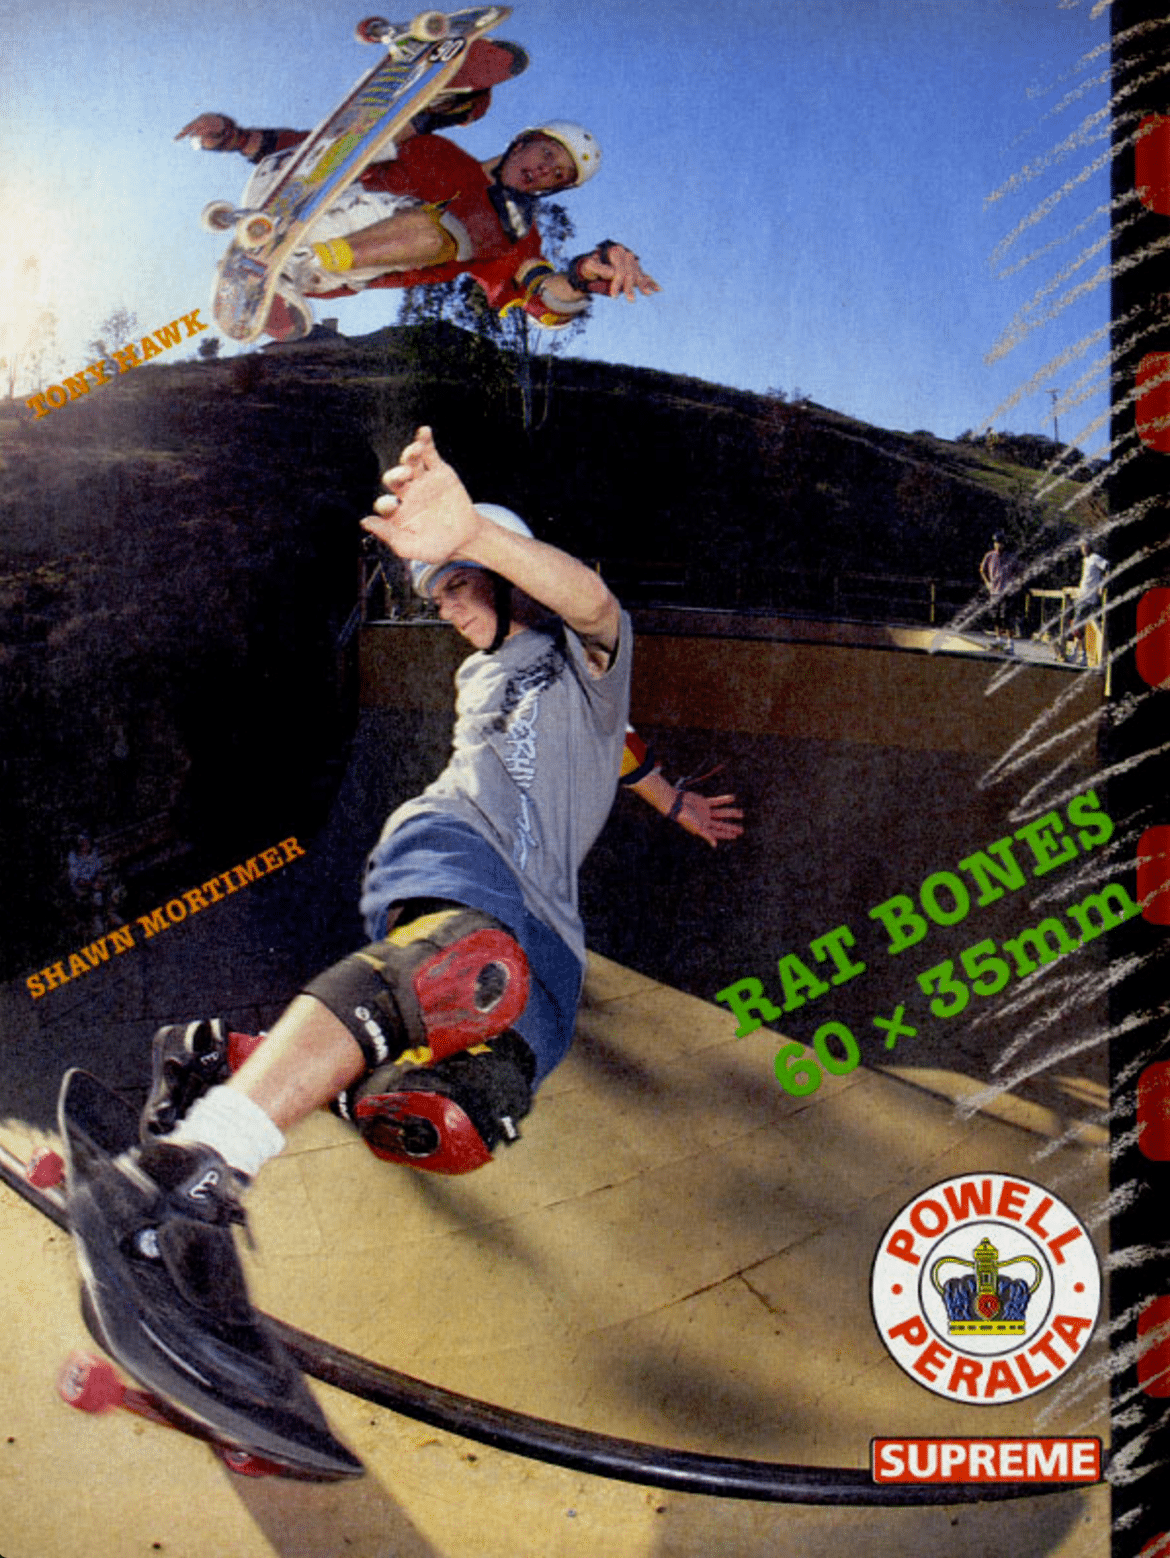 ‘I’m not sure how we pulled off this ollie to fakie over fs hurricane in 1990 though. And did we help create Supreme with this ad? It’s all a blur.’ - IG response from Tony Hawk to Sean’s post